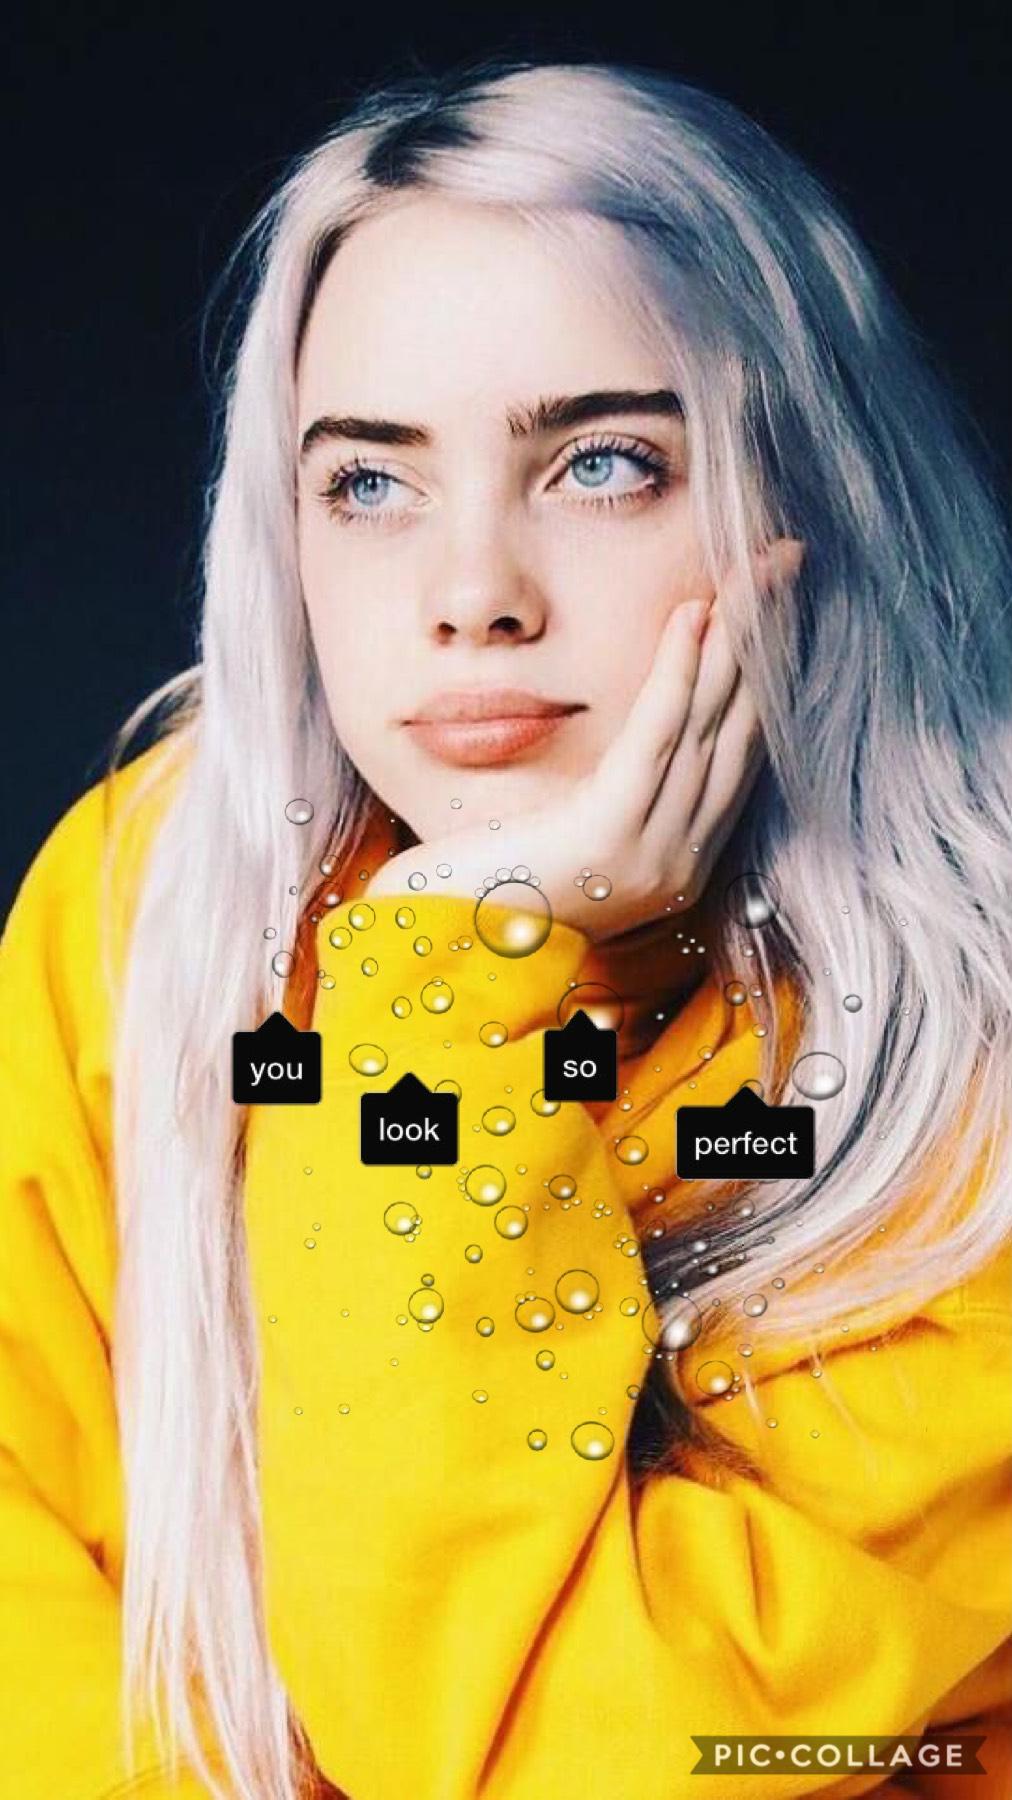 Billie Eilish is way better than she’ll ever know 